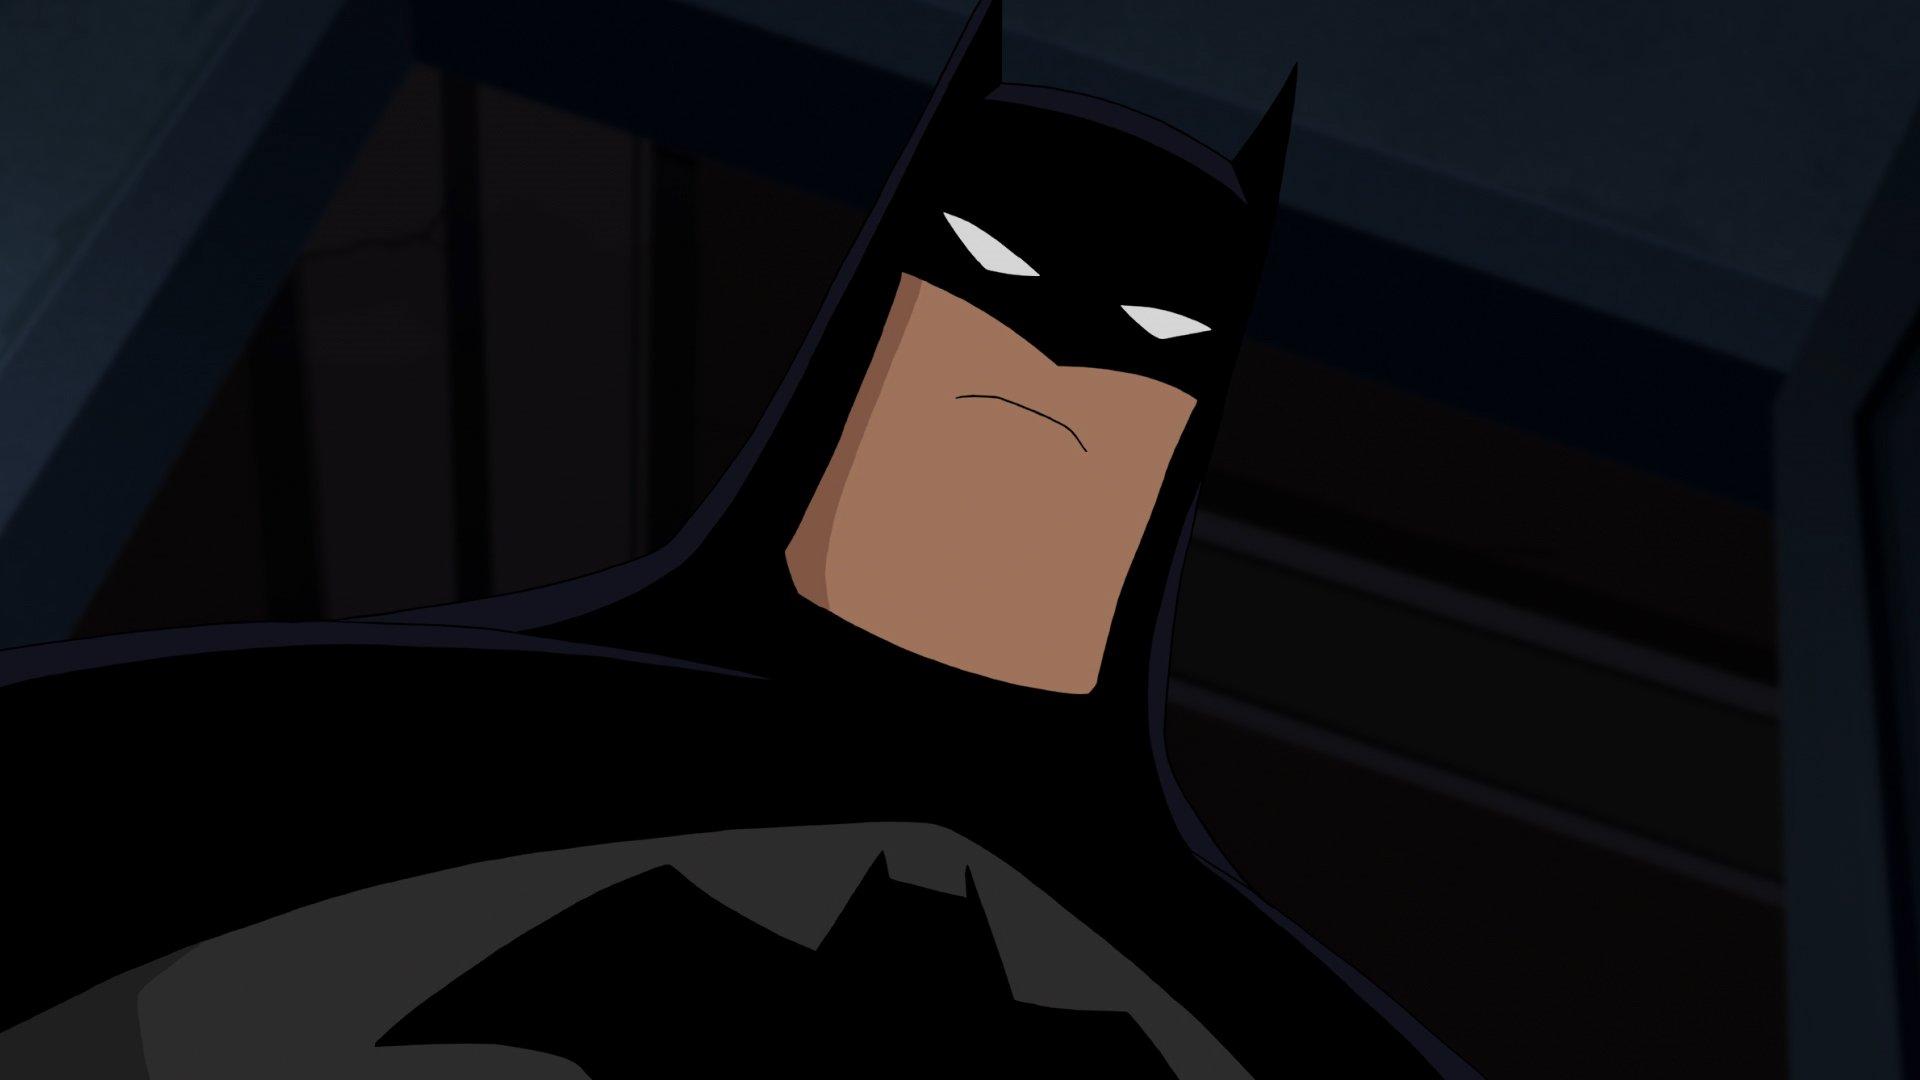 Continue below for a gallery of officially released images from the Batman ...